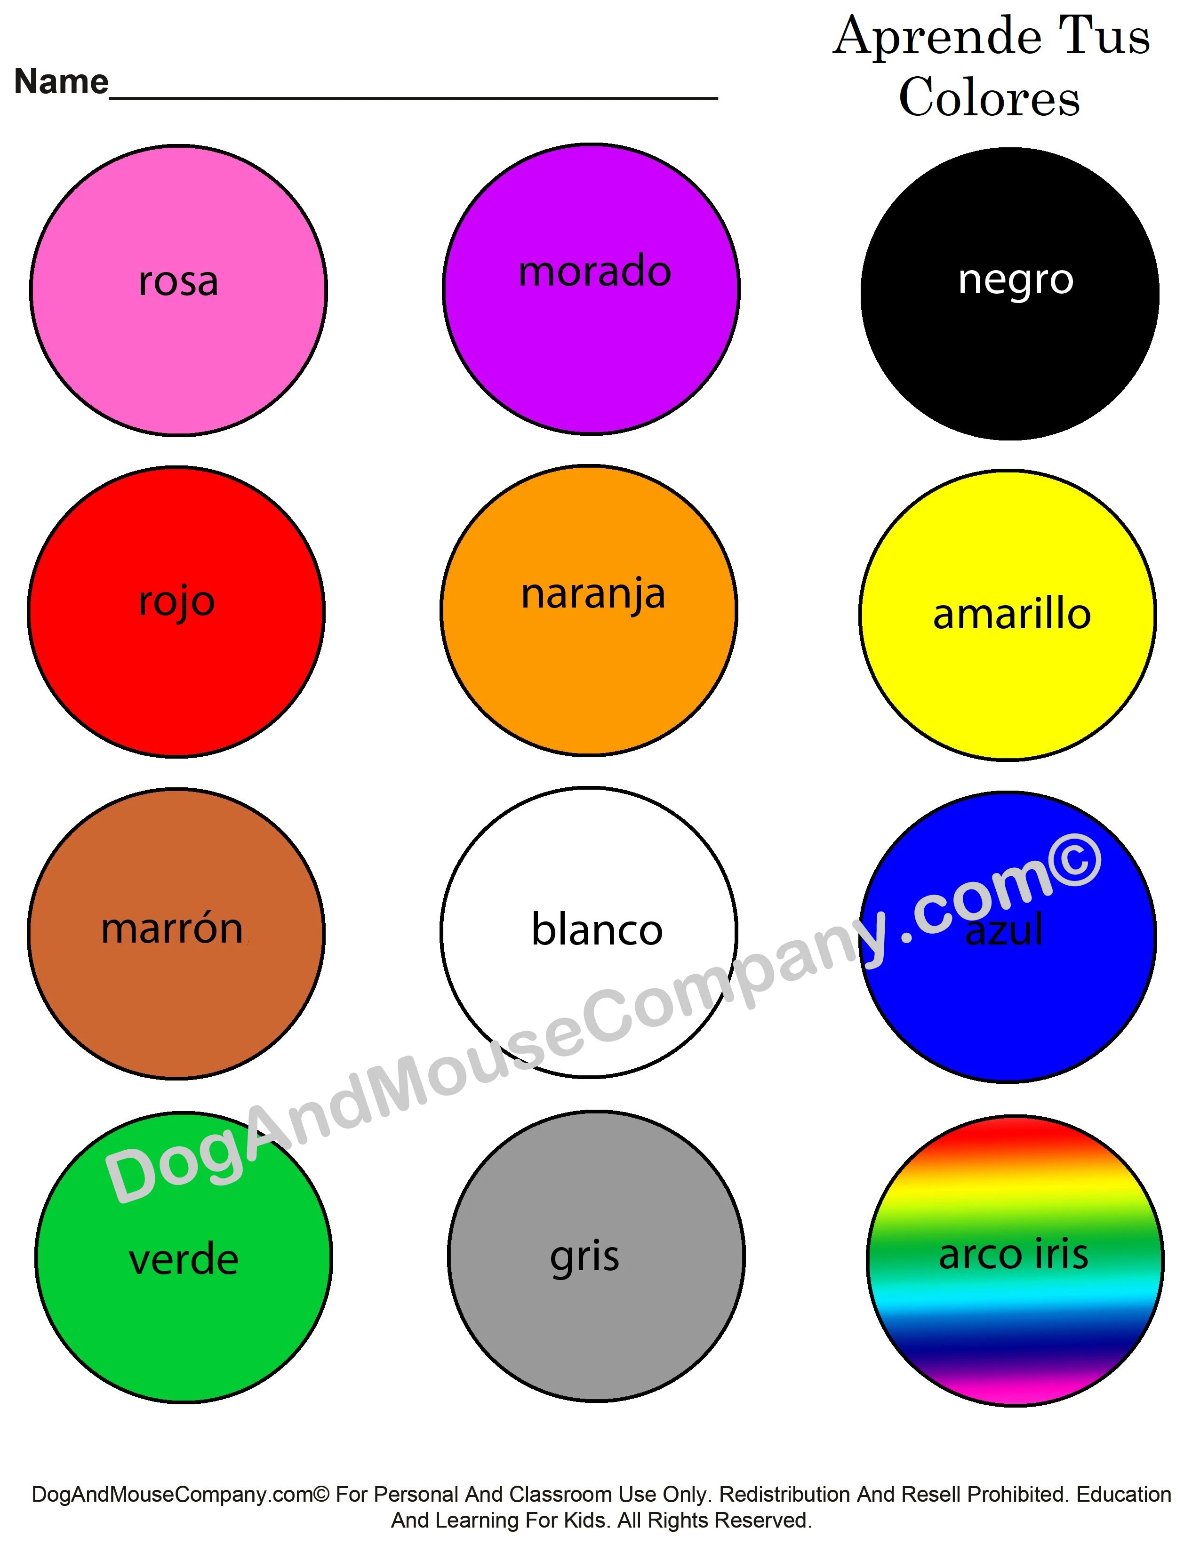 spanish-worksheets-for-kids-colors-colorful-animation-real-images-and-adorable-characters